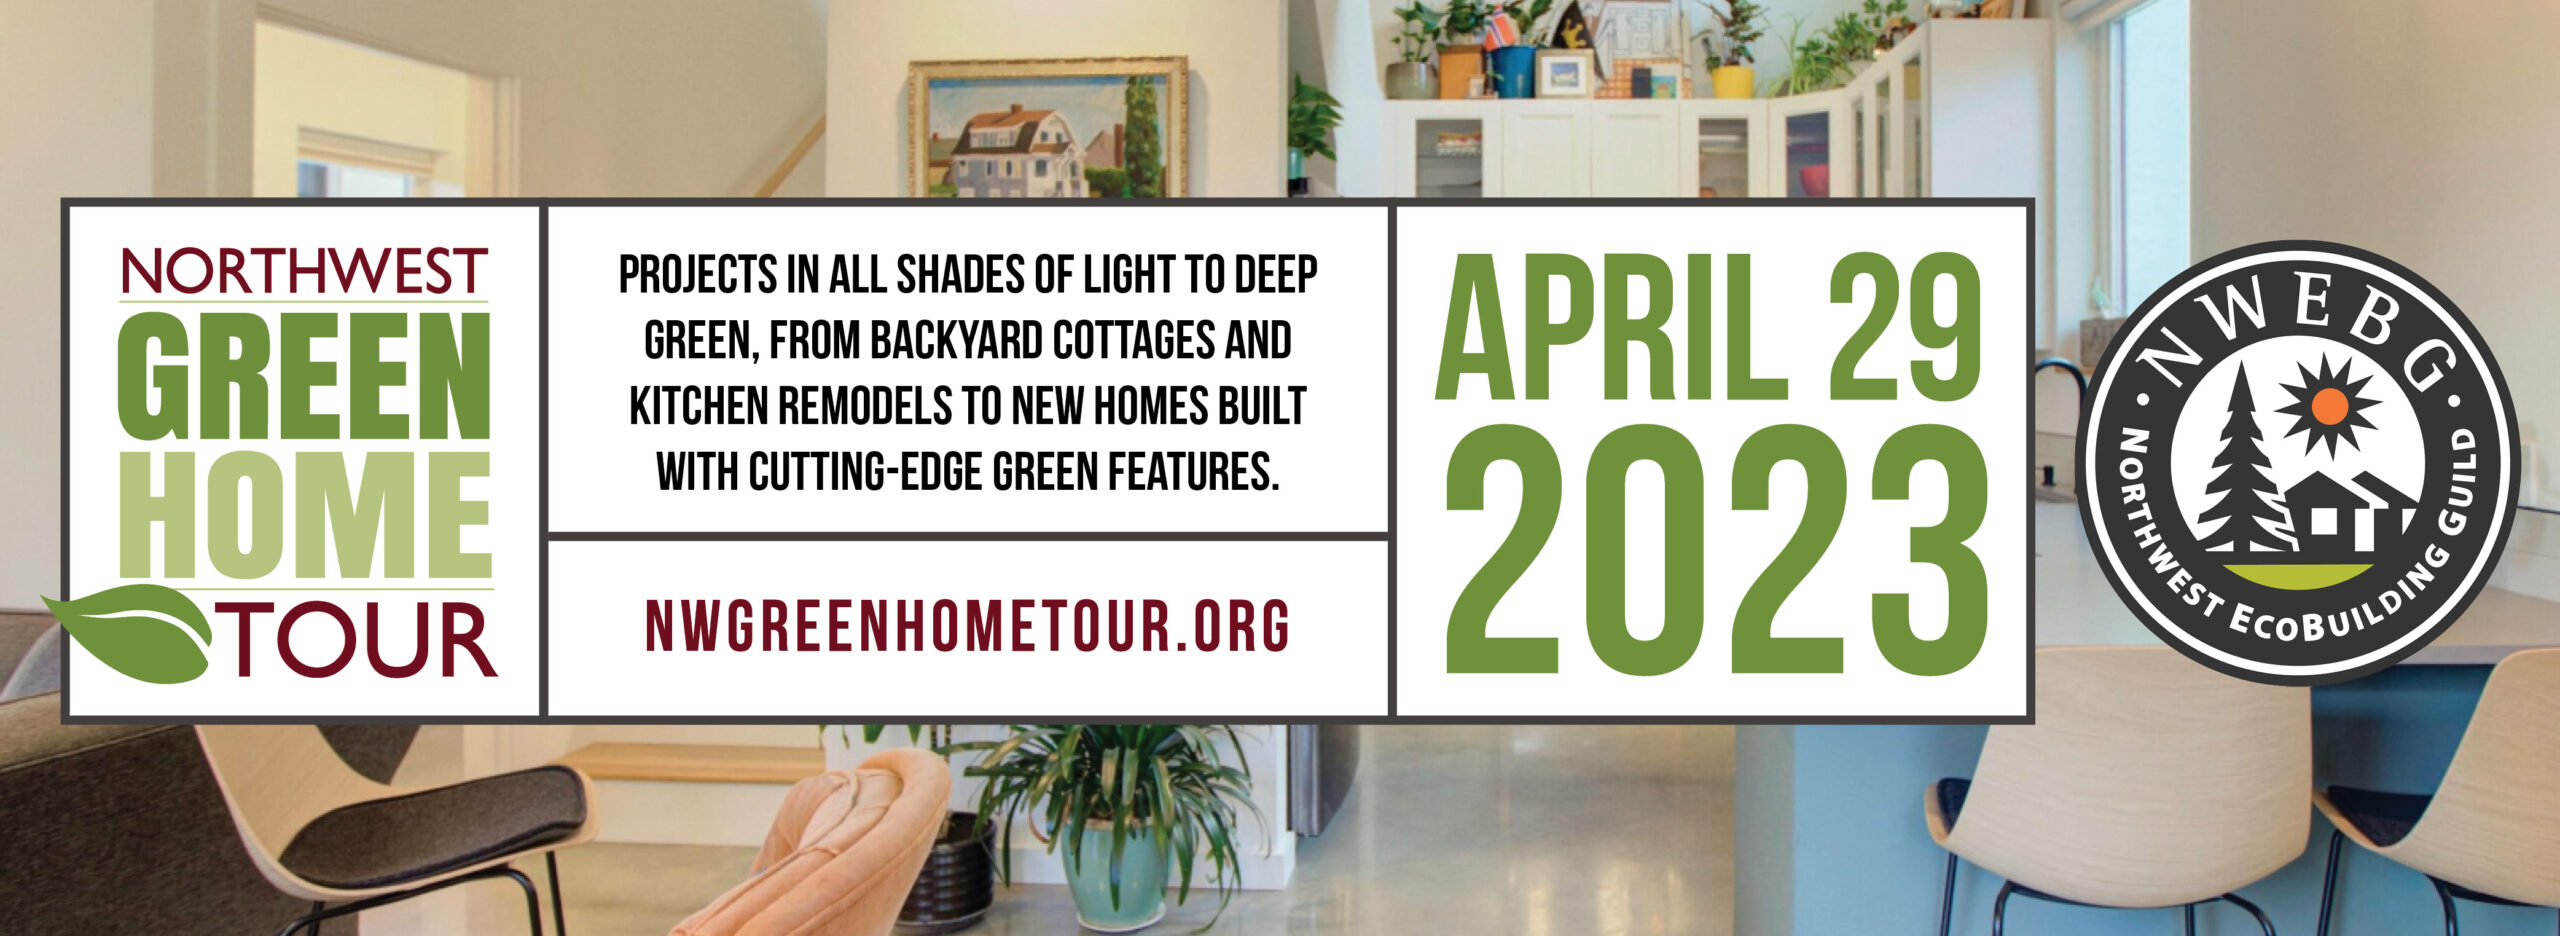 NW Green Home Tour